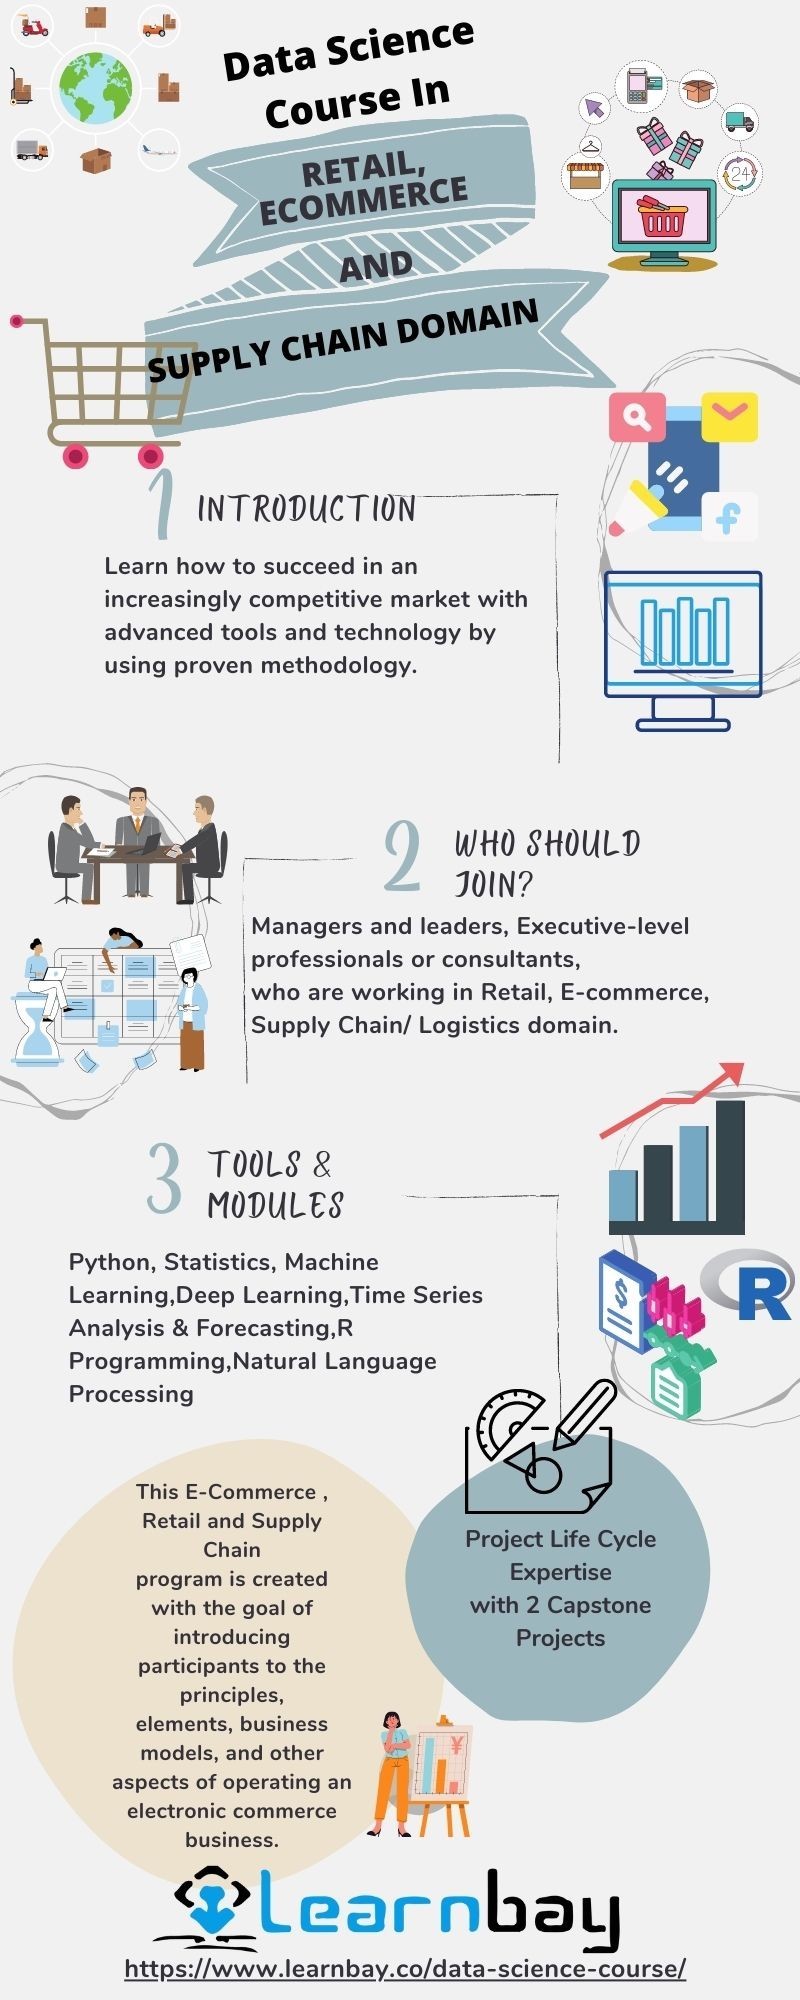 Data Science Course In Retail, Ecommerce And Supply Chain Domain